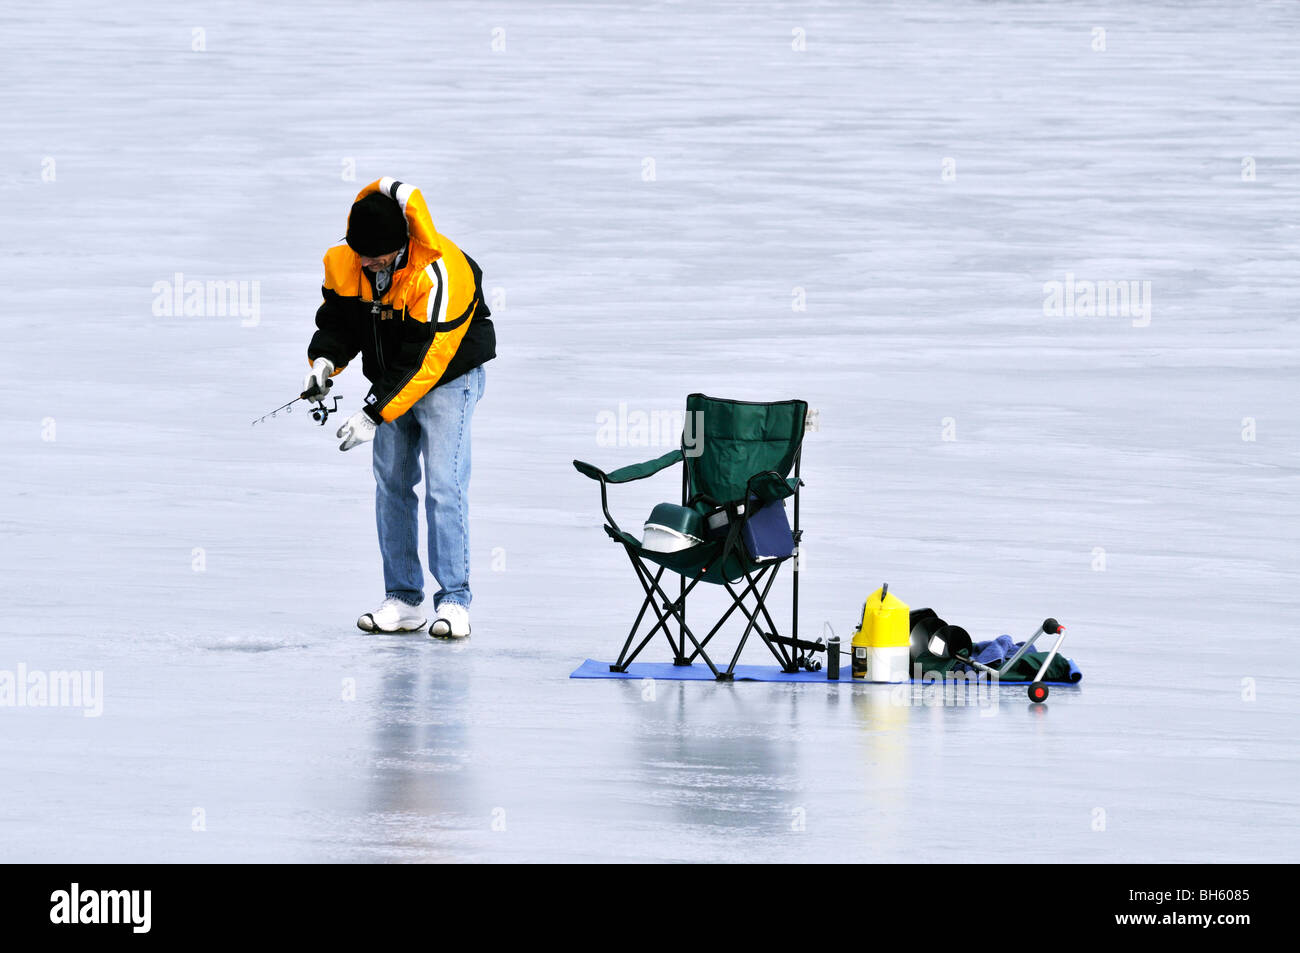 https://c8.alamy.com/comp/BH6085/single-man-ice-fishing-on-frozen-pond-with-chair-and-gear-on-cape-BH6085.jpg